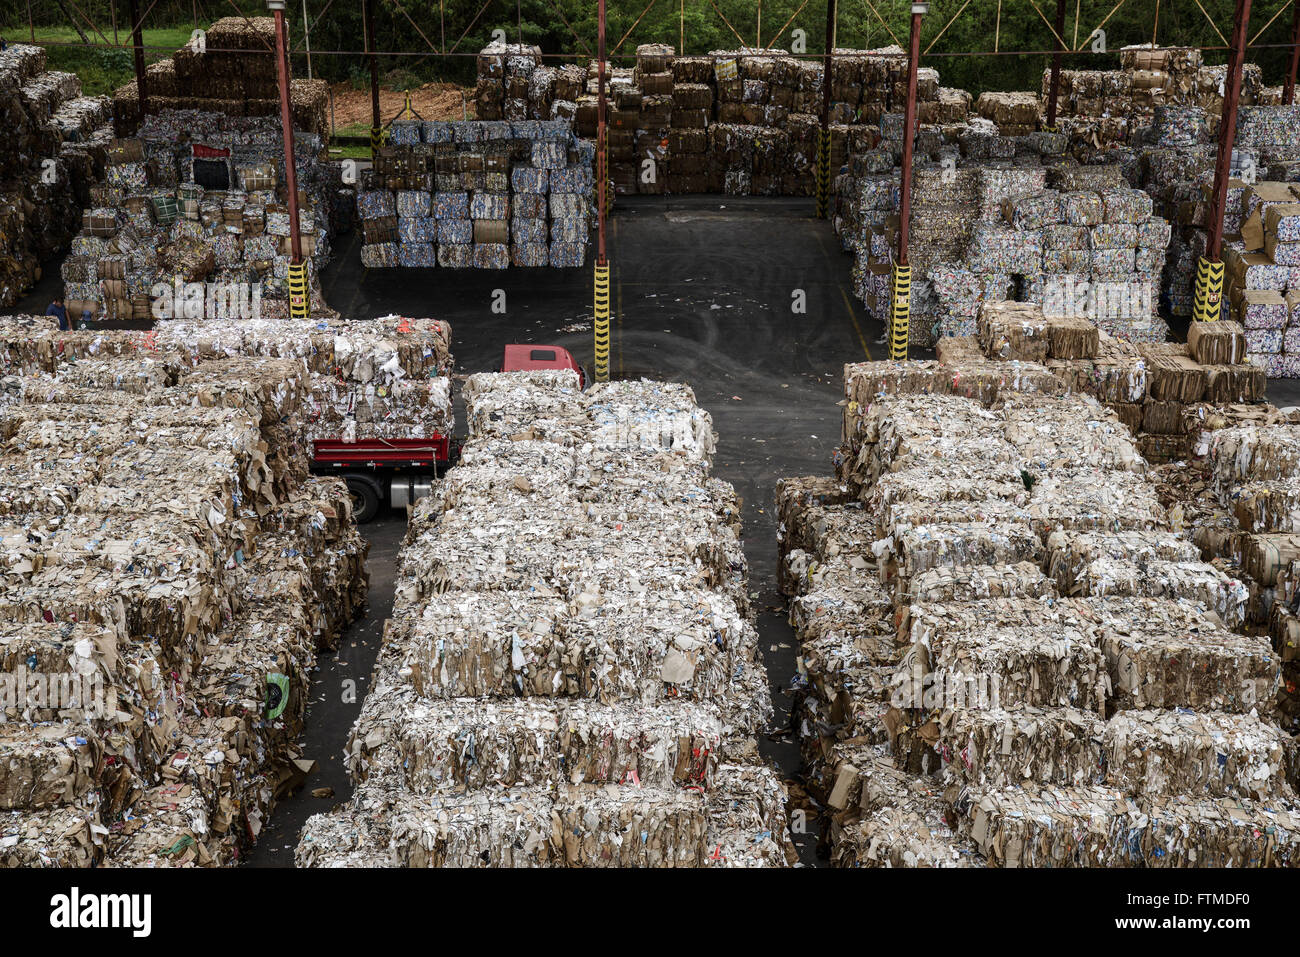 View of deposits during the process of separation and organization of bales of recyclable materials Stock Photo